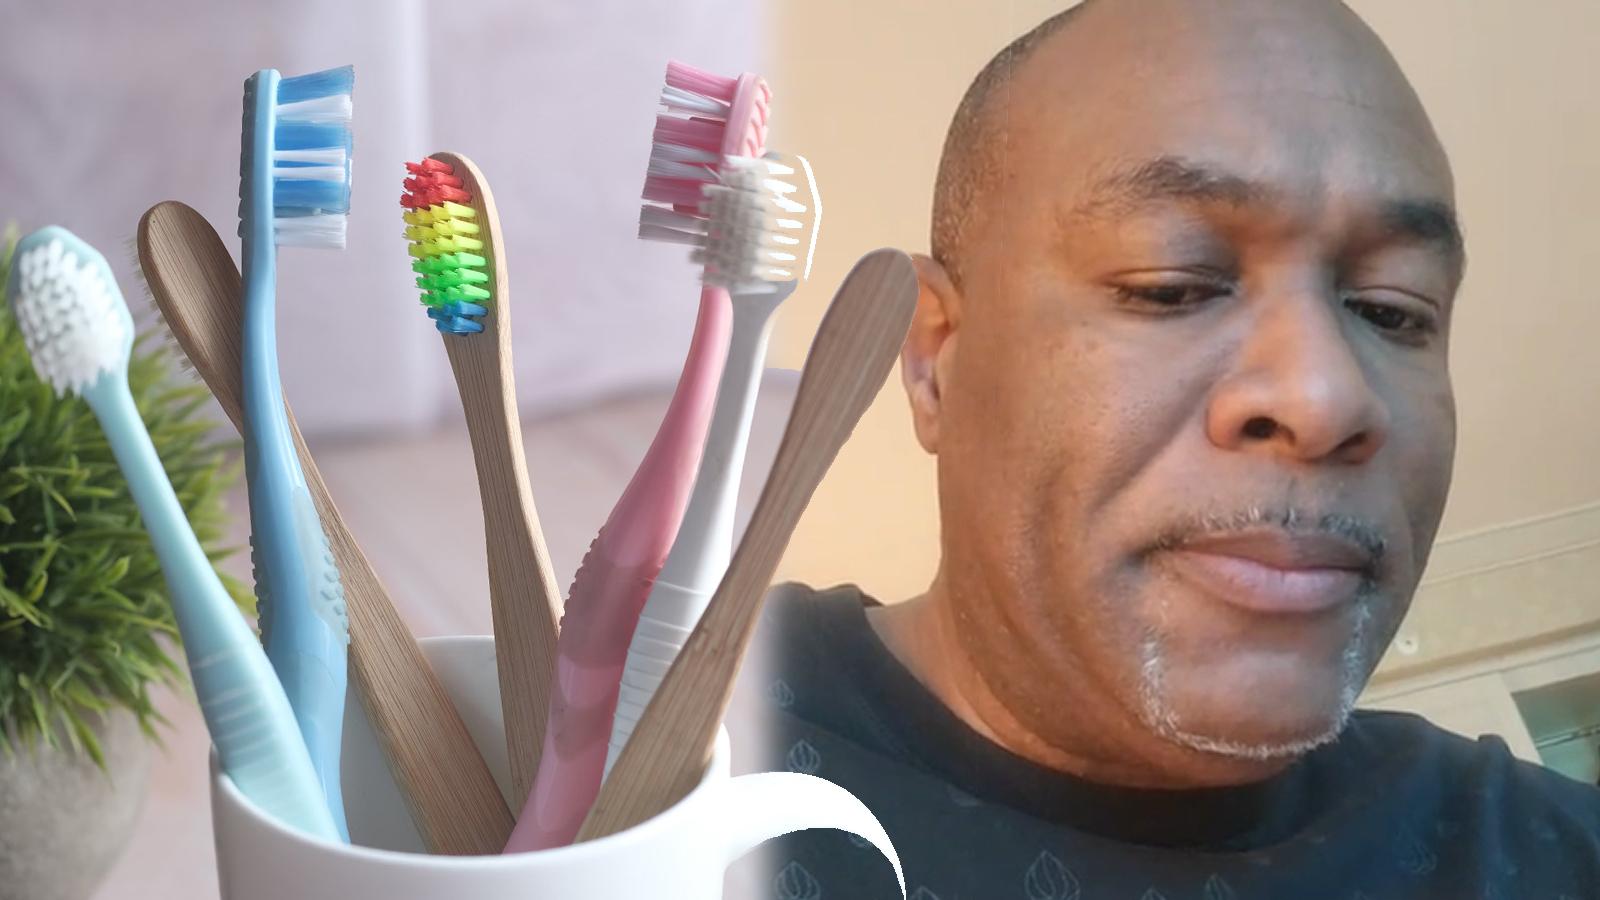 Man furious after hotel offers $50 credit for using his toothbrush to clean